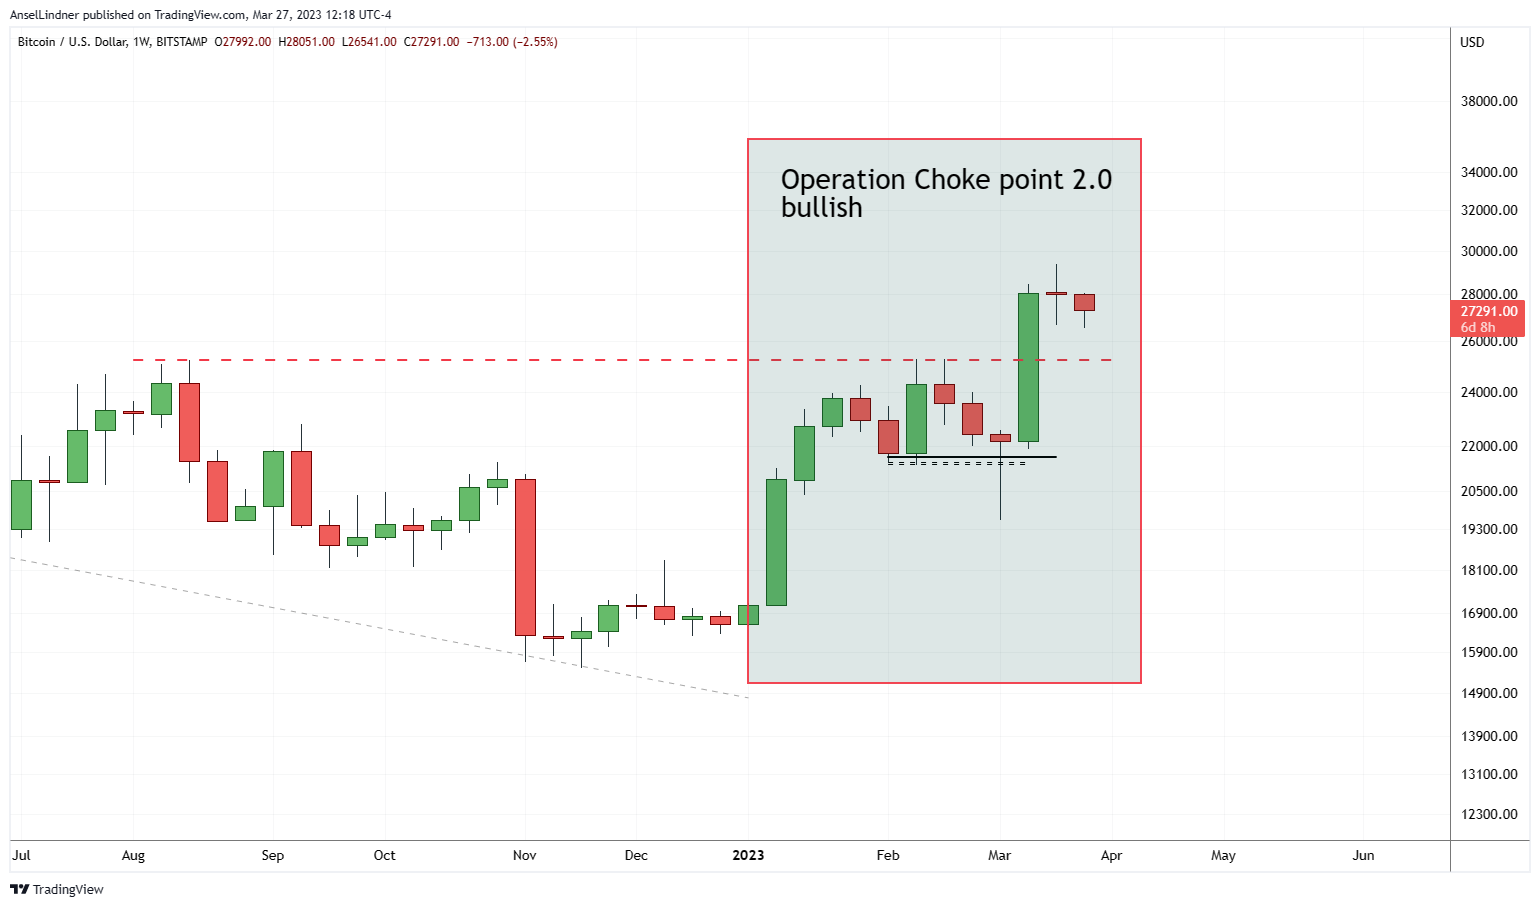 Bitcoin's performance in Operation Choke Point 2.0 as of 3.27.23